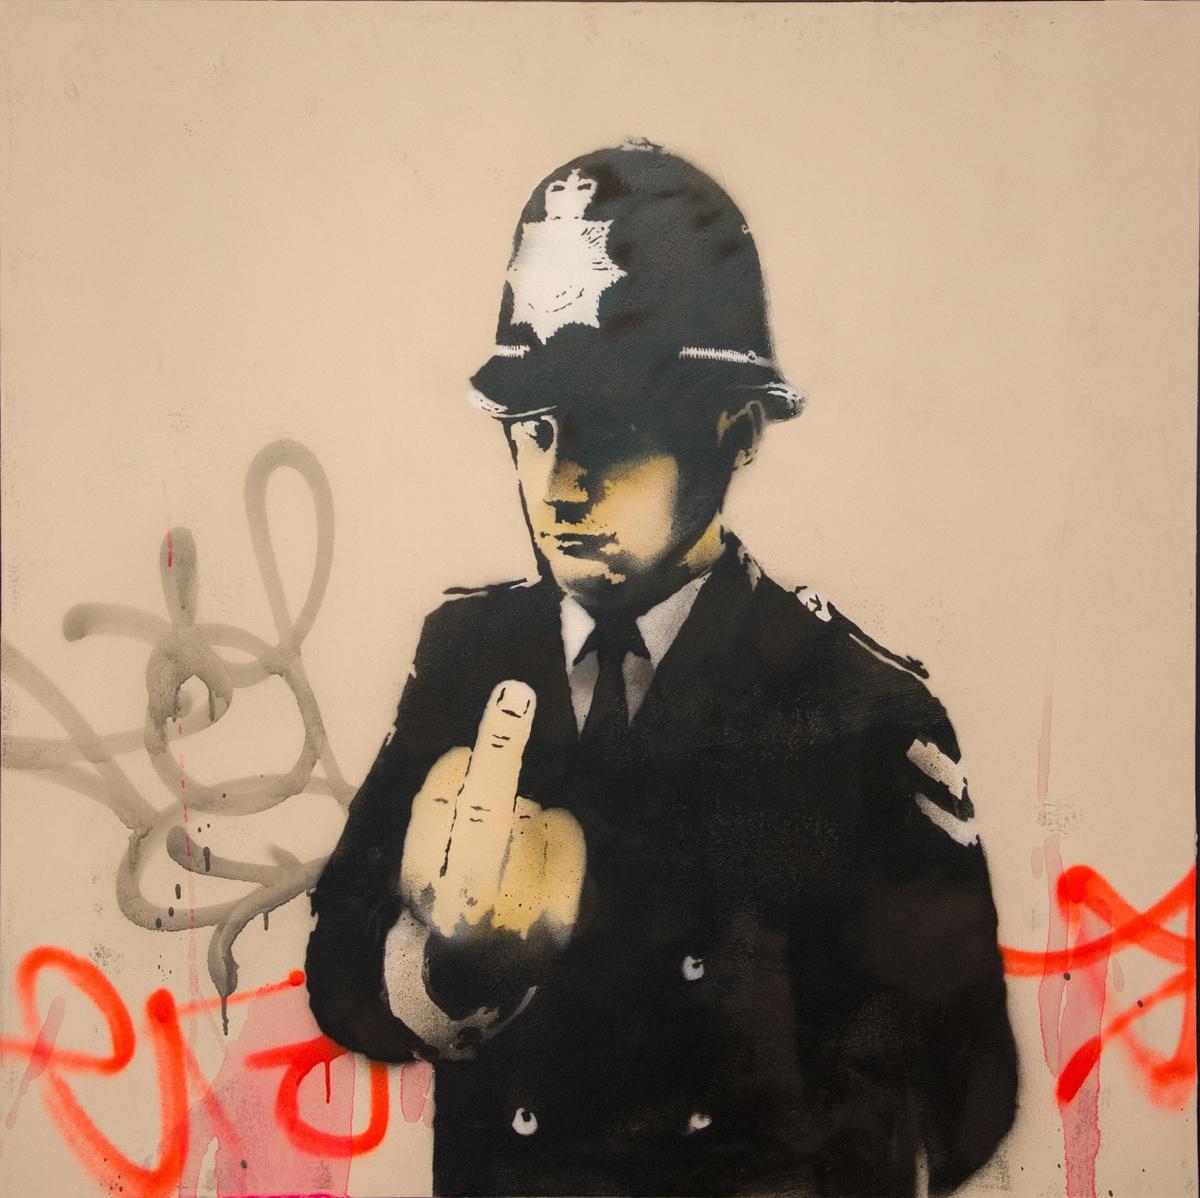 A version of Banksy's Rude Copper, similar to those bought by Maurizio Fabris according to the ICIJ

Photo: Jan Fritz / Alamy Stock Photo